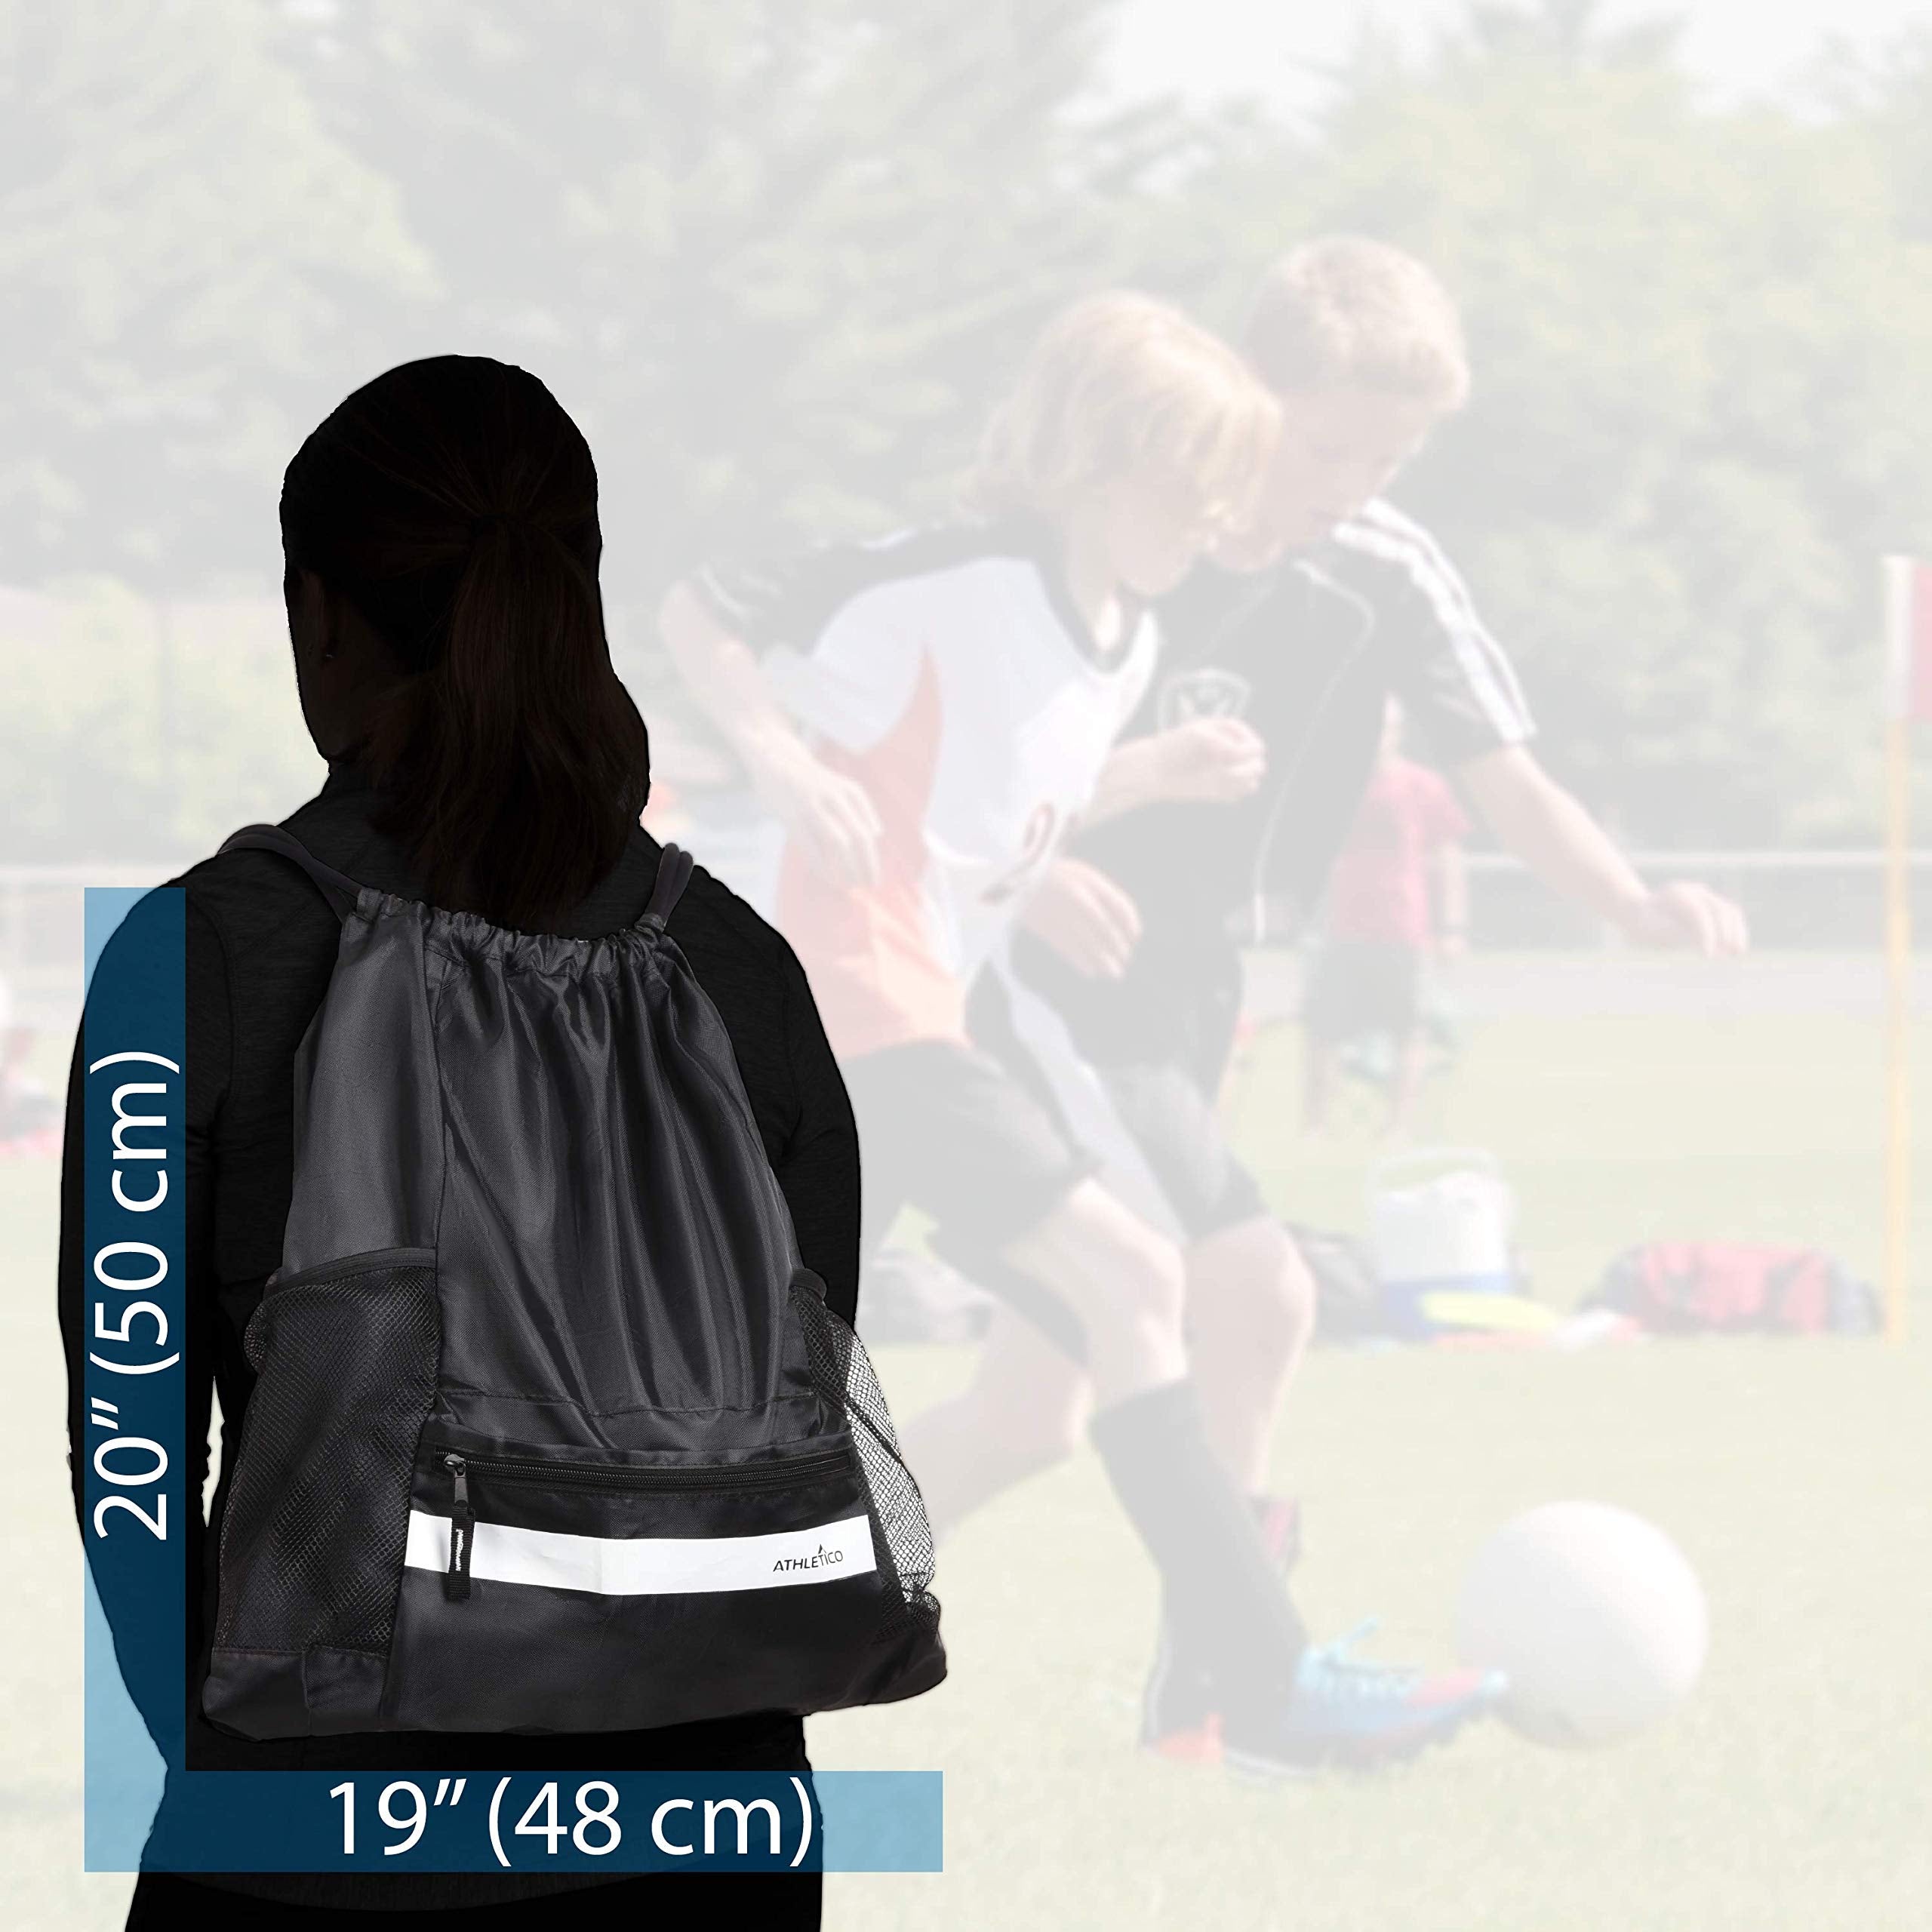 Athletico Drawstring Soccer Bag - Soccer Backpack For Boys or Girls Can Also Carry Basketball or Volleyball  - Good